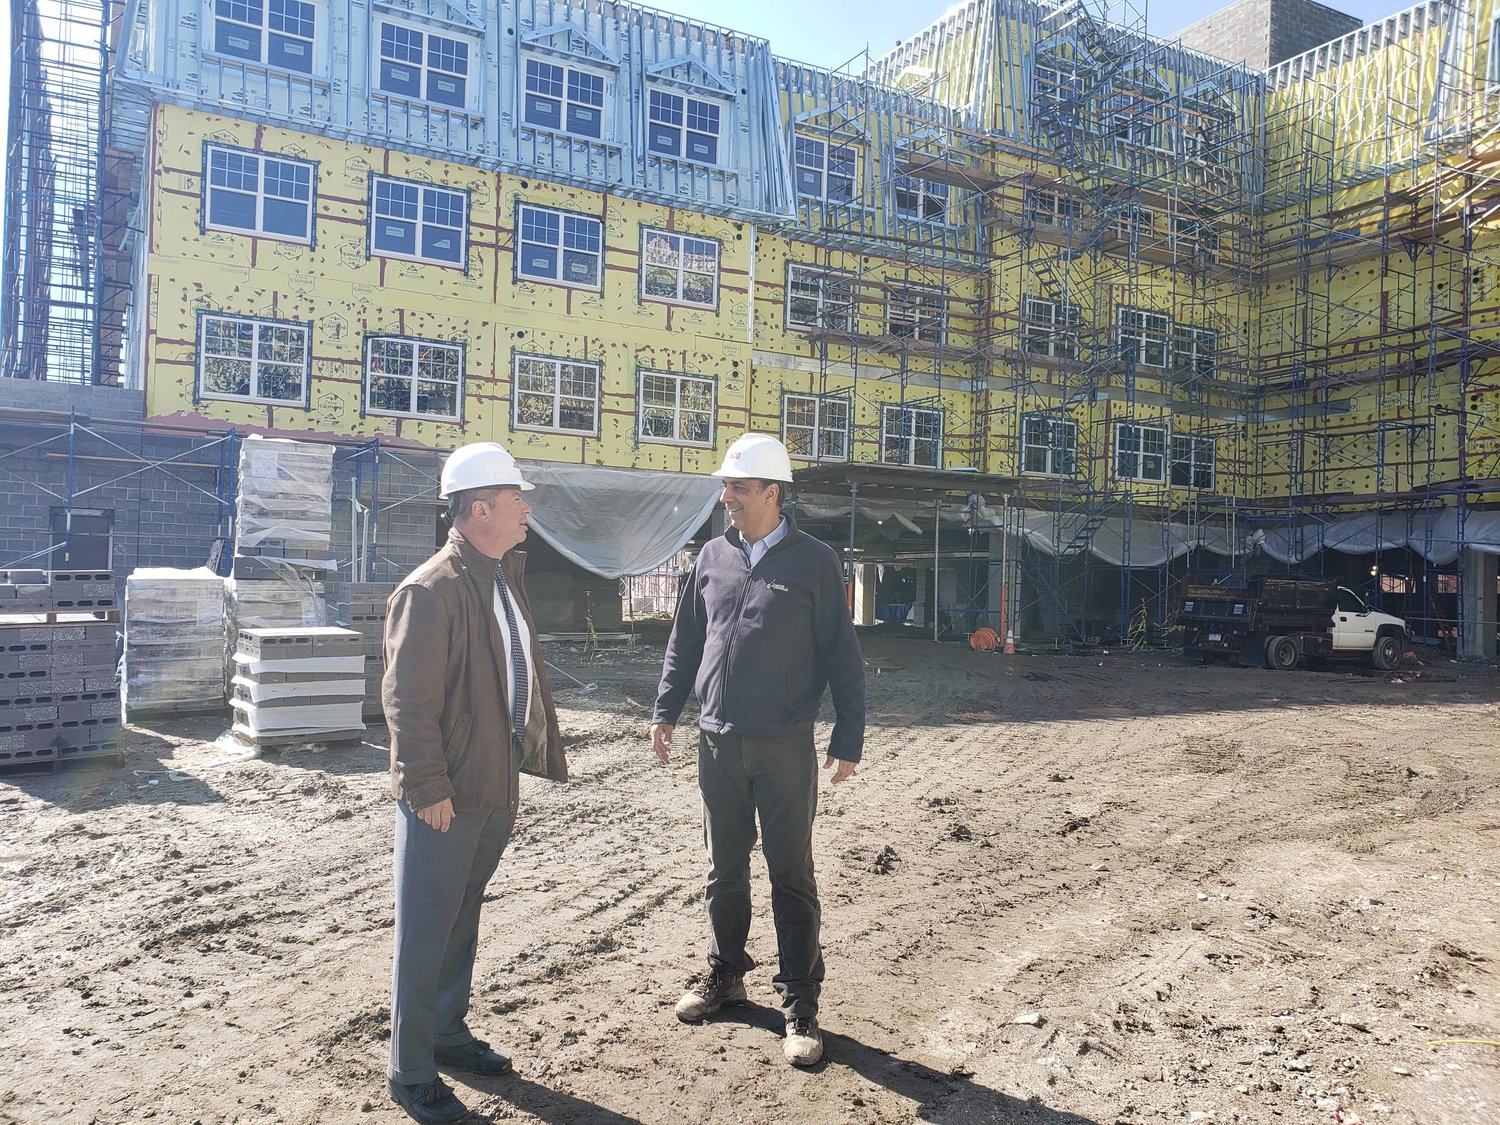 The Freeport Housing Authority’s executive director, John Hrvatin, left, chatted with Jobco’s project manager, Spiros Triantafyllou, about the progress on the new Moxey Rigby.